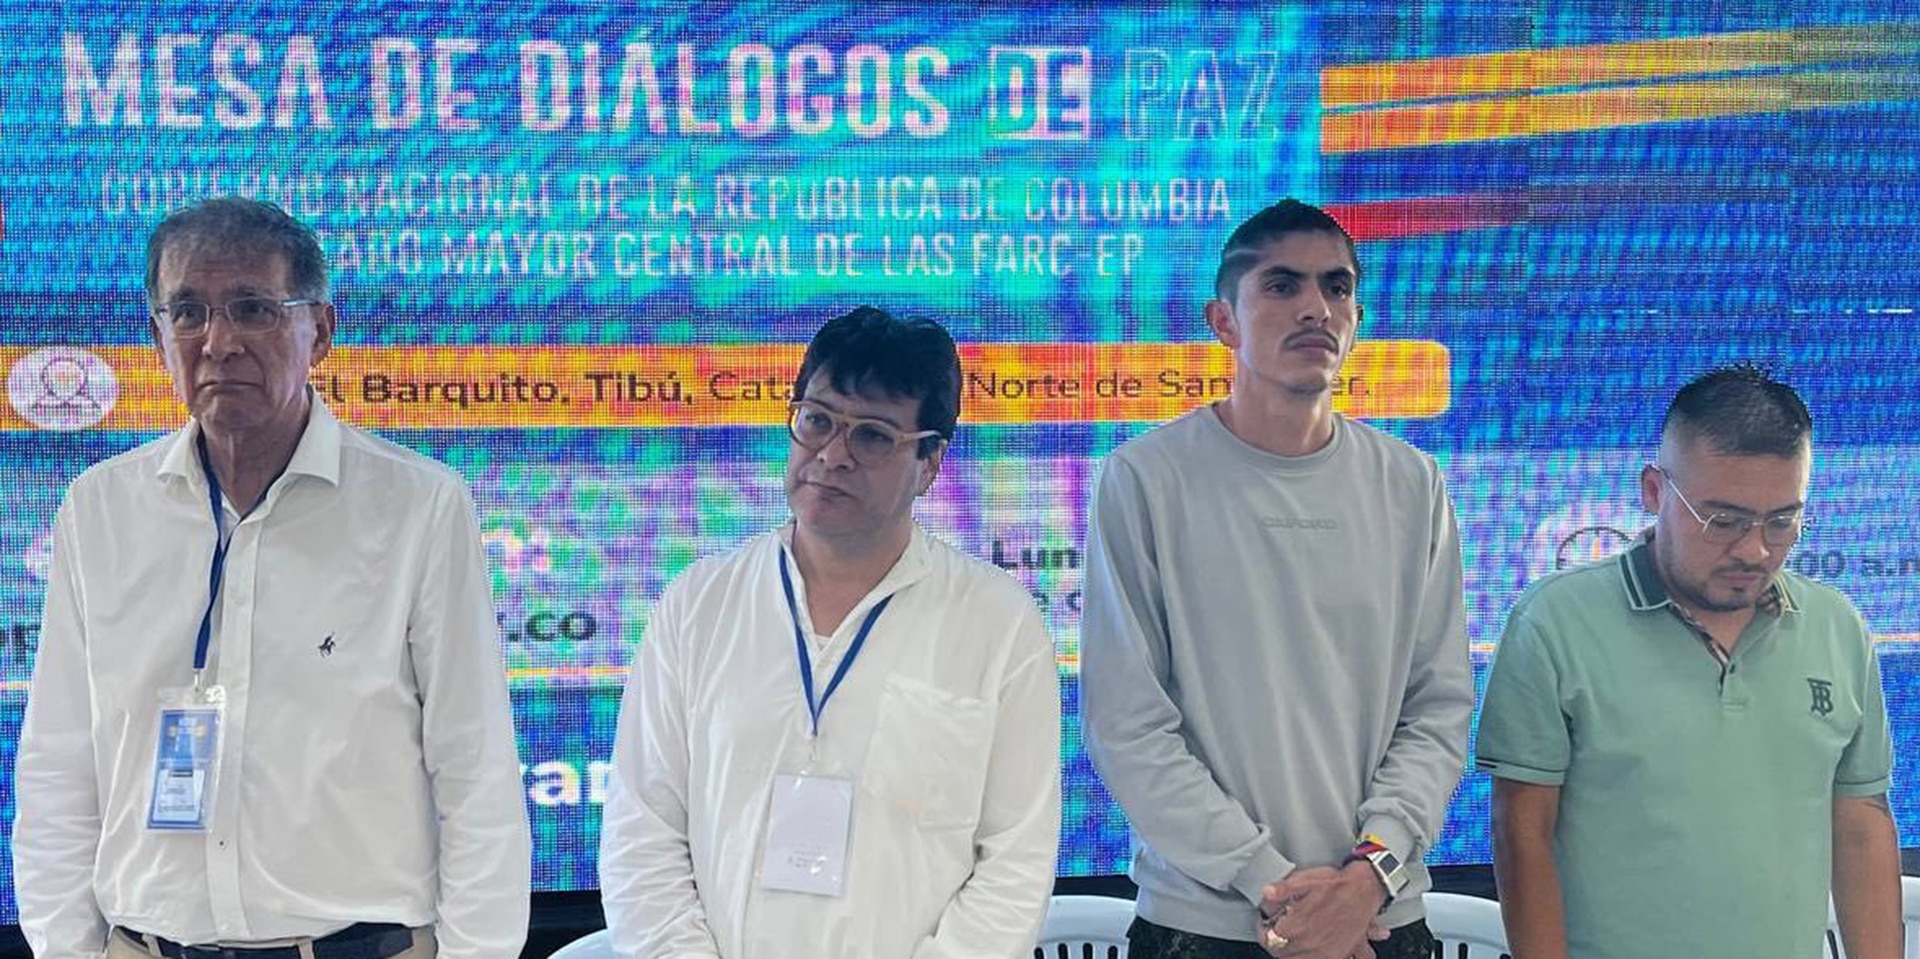 Four earnest looking men are standing in front of a blue background with the peace dialogue logo.